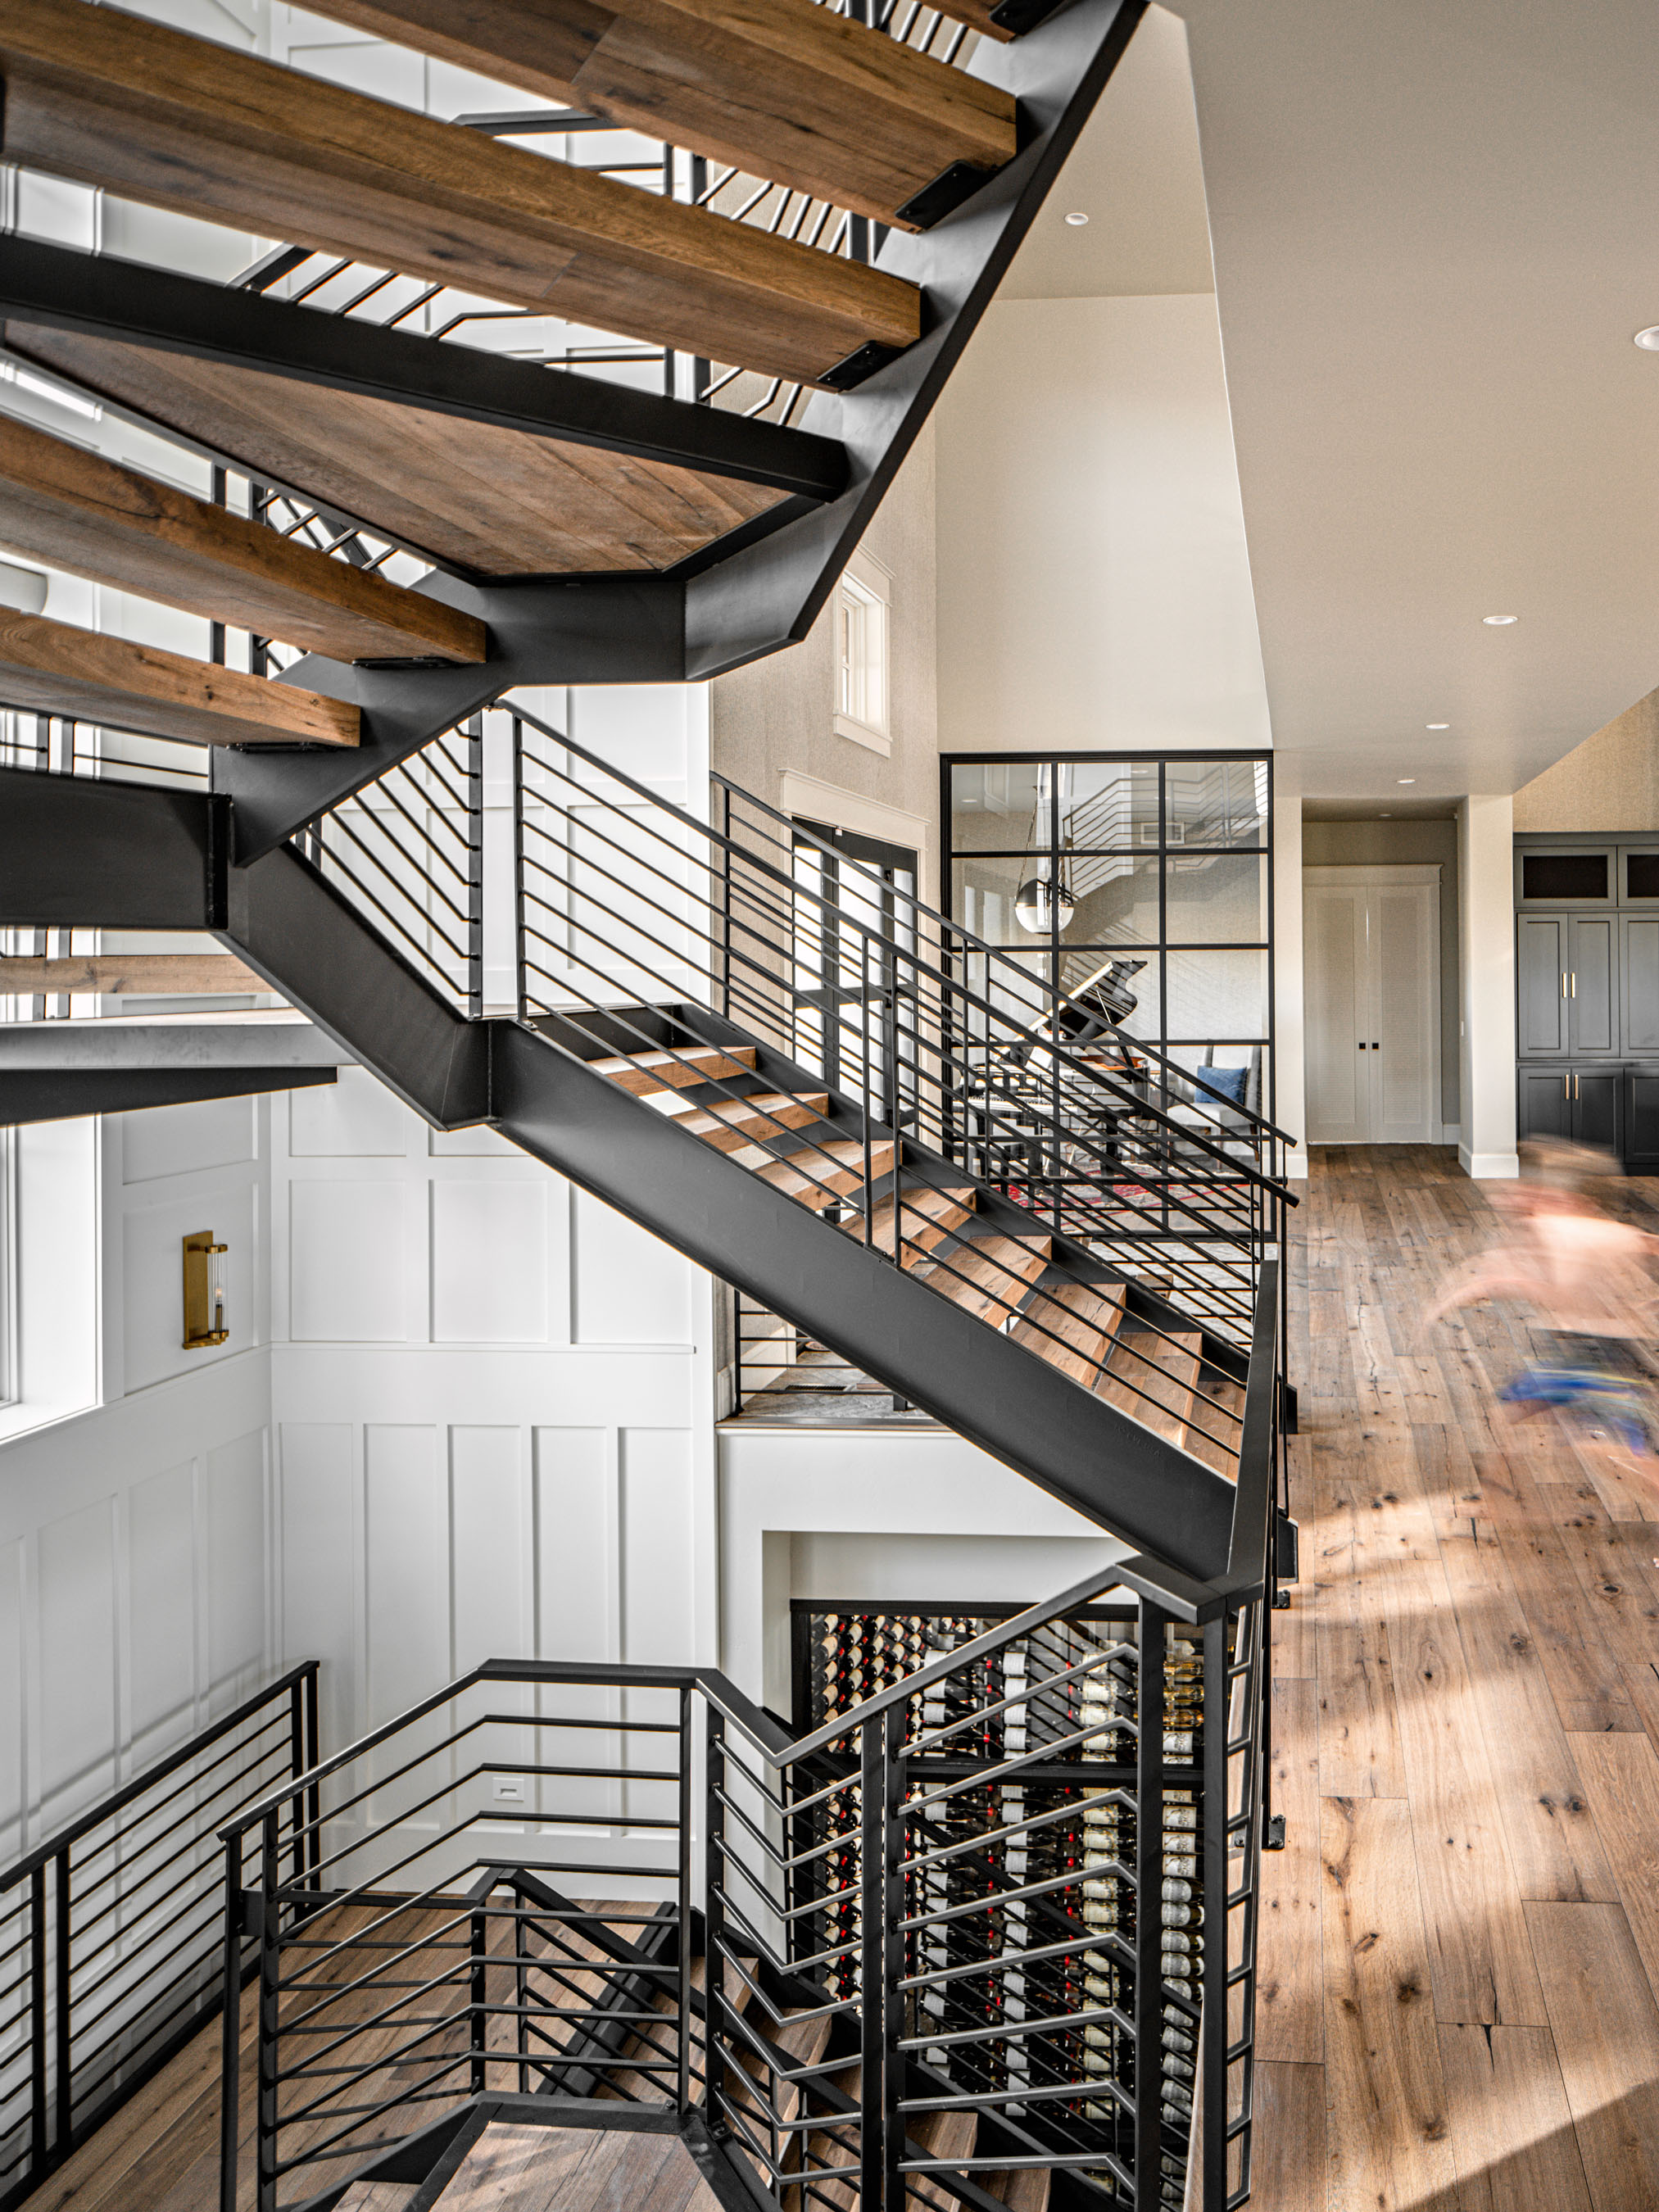 Residential architecture photography by Warren Diggles. Custom steel stairway. New construction project by Brannen Homes.